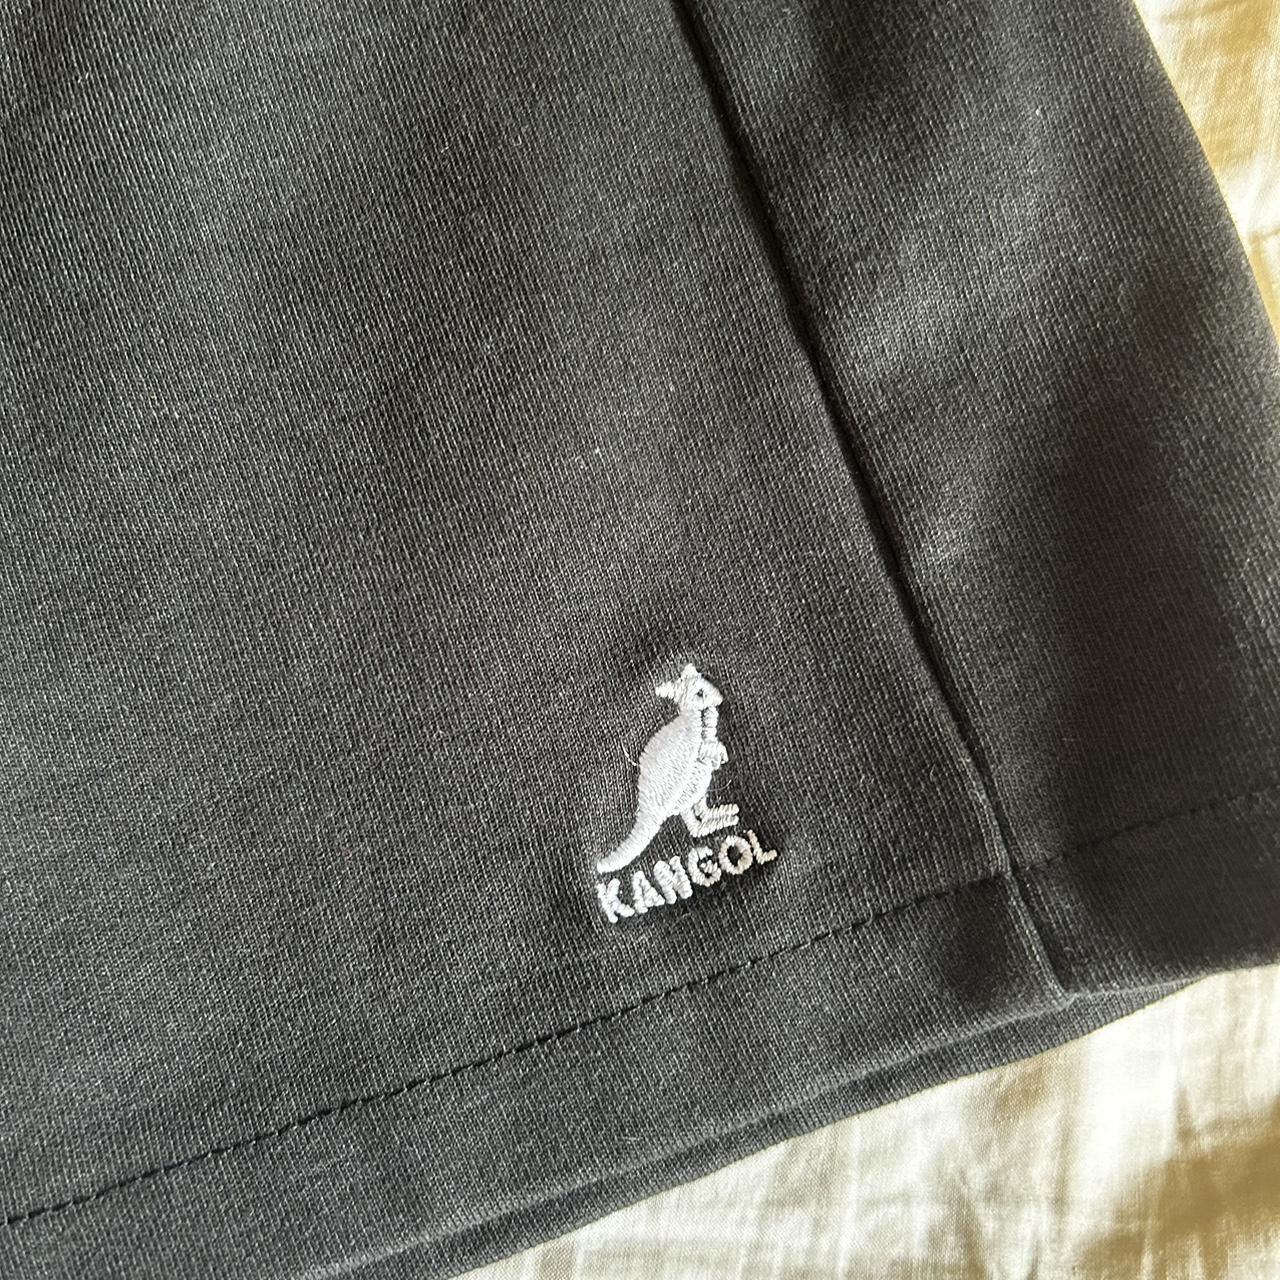 Kangol shorts, never worn band new without tags,... - Depop